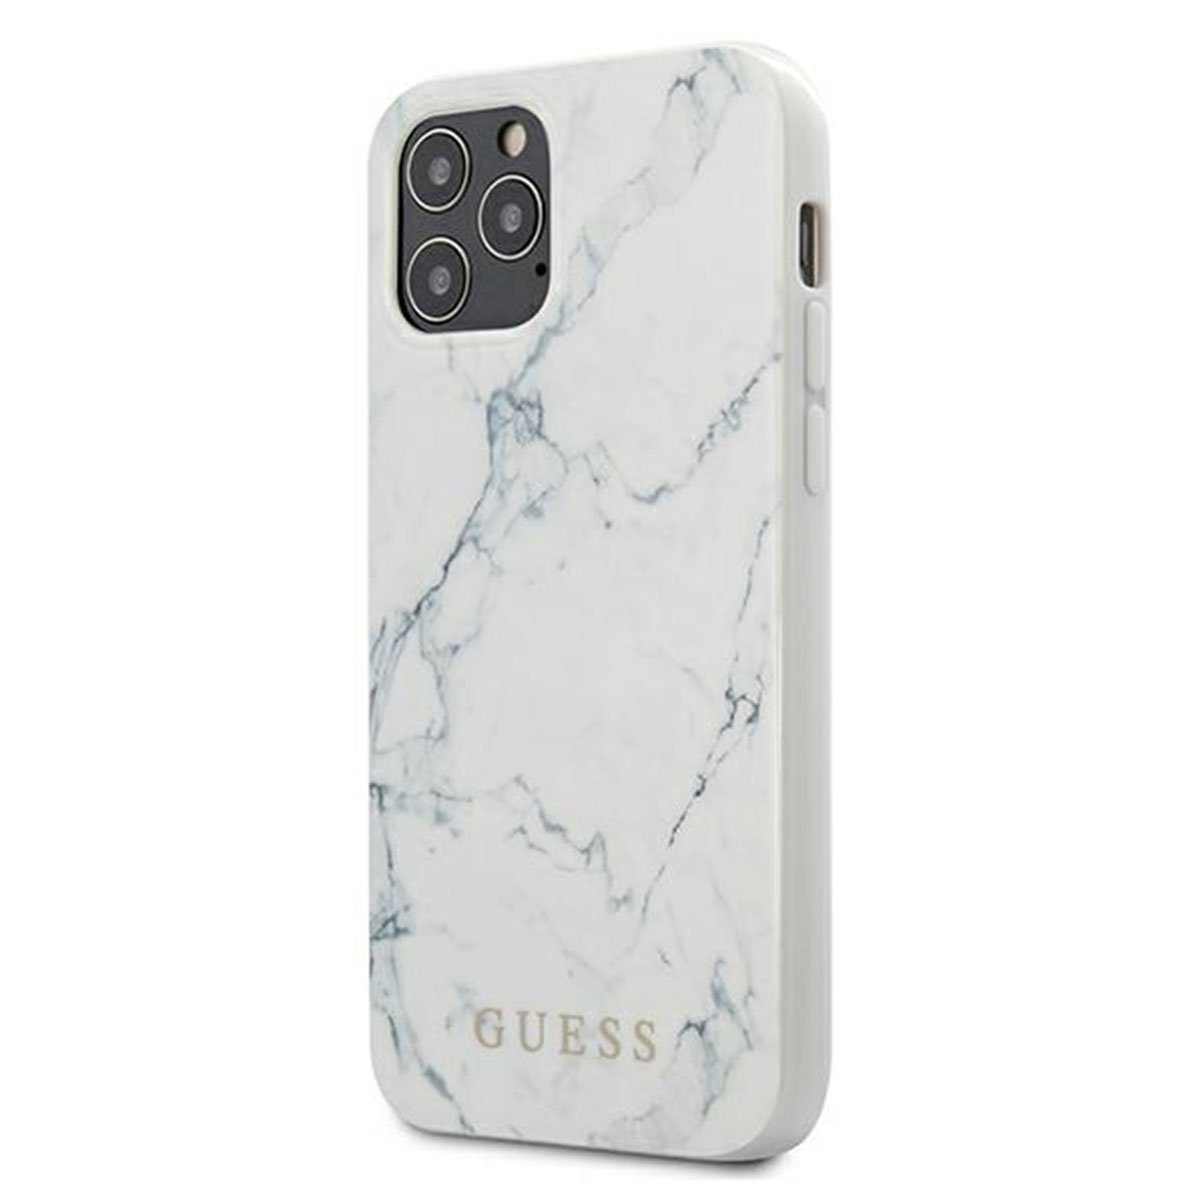 Guess Handyhülle »Guess Marble Collection Apple iPhone 12 / 12 Pro Weiß  Marmor Hard Case Cover Schutzhülle Etui« online kaufen | OTTO